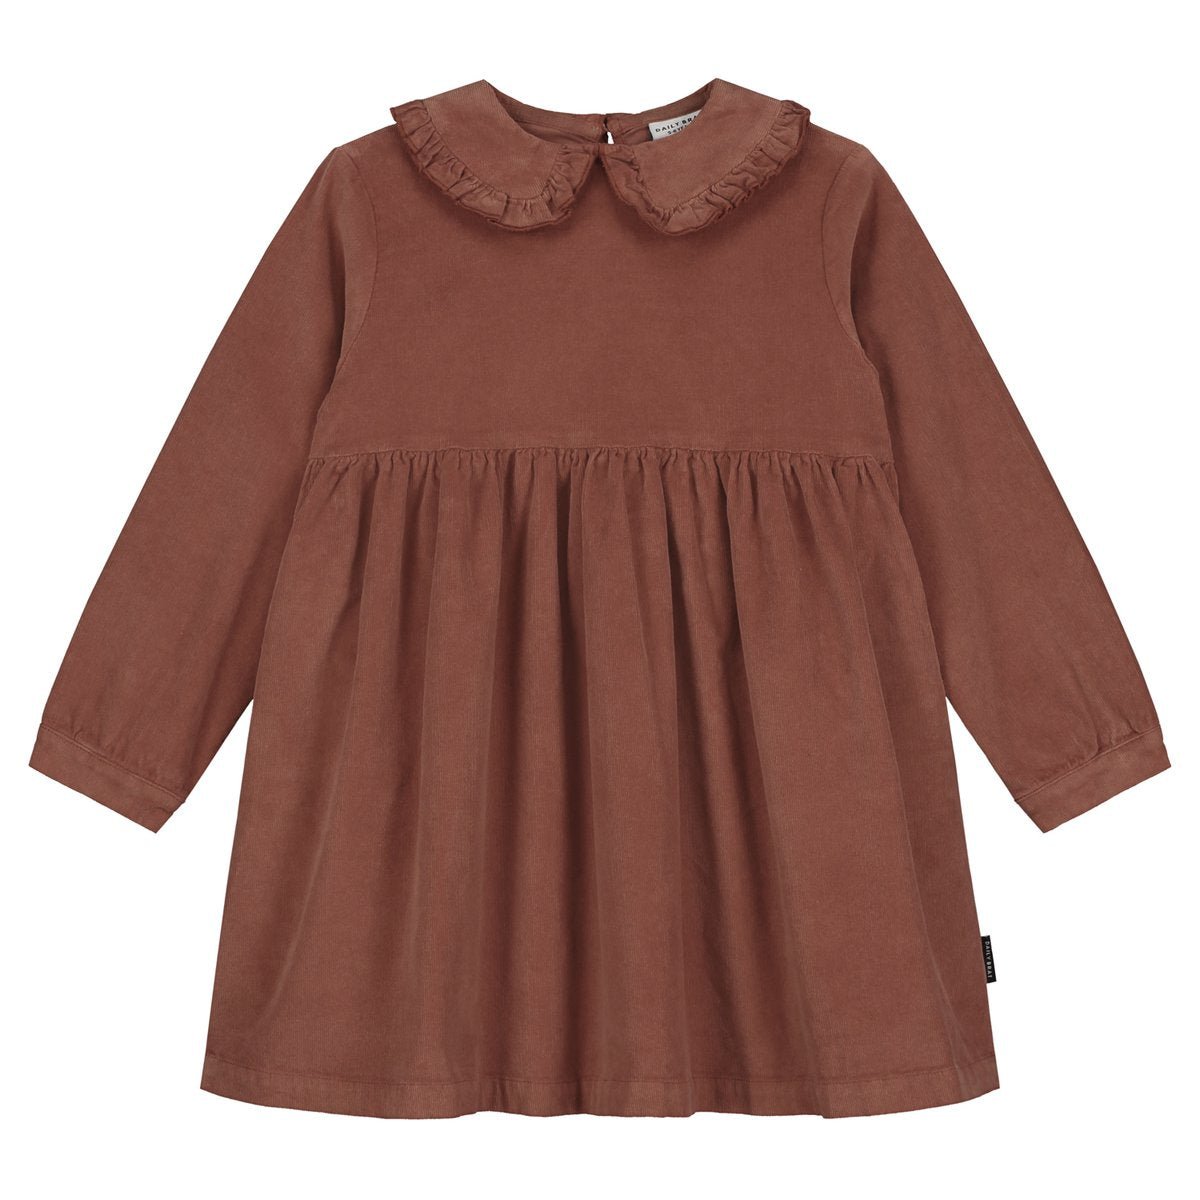 Taylor Corduroy Dress Brick find Stylish Fashion for Little People- at Little Foxx Concept Store